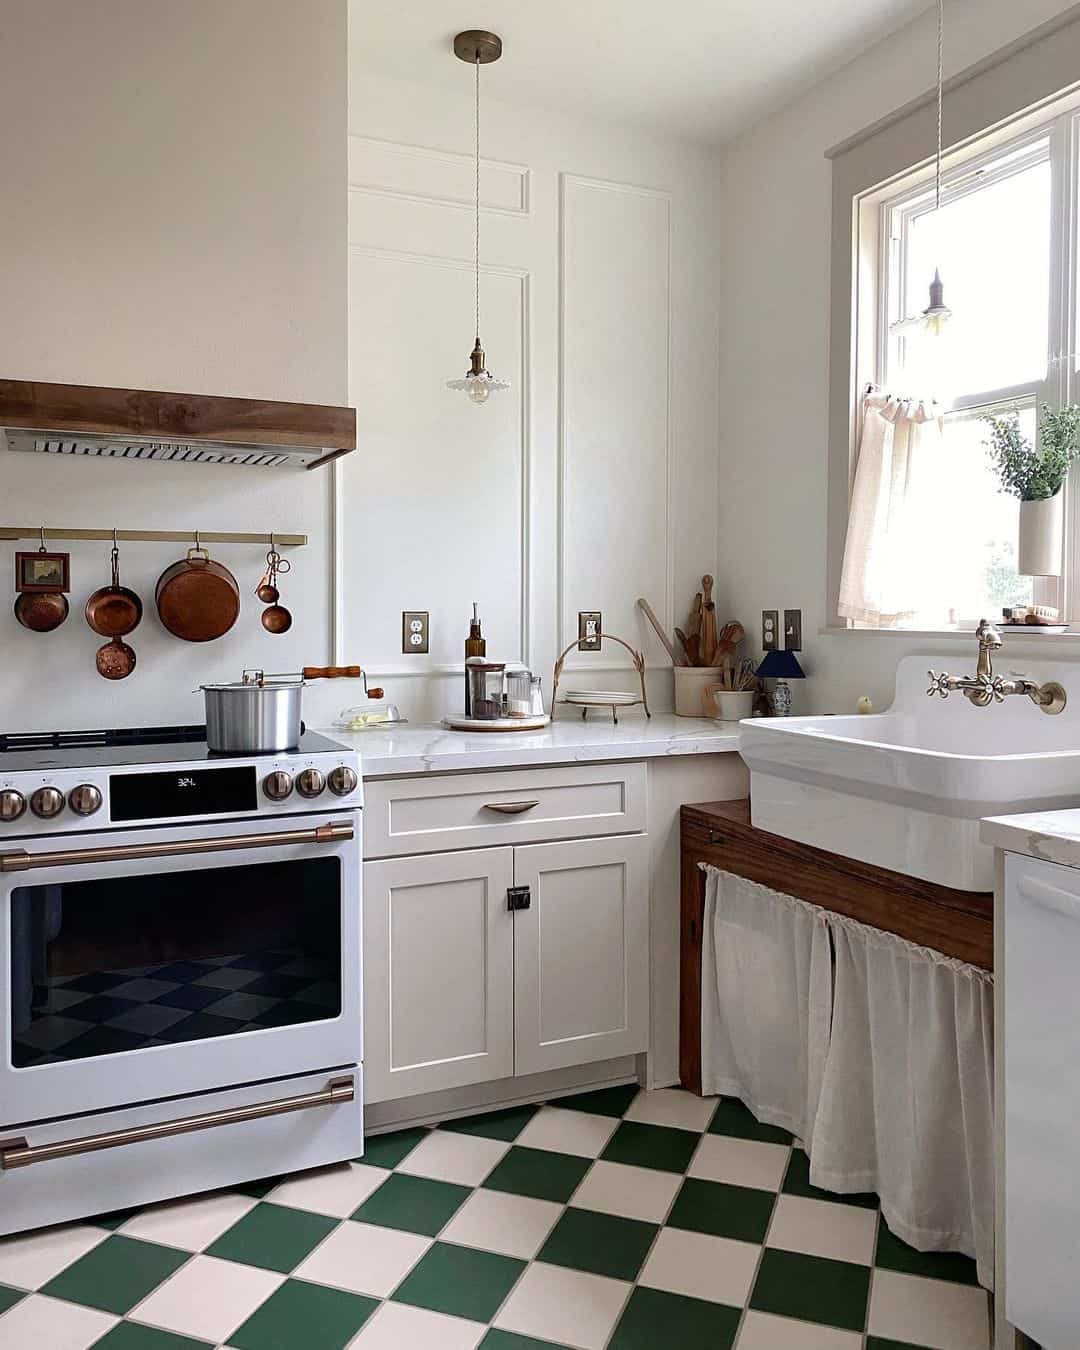 22 Tile Ideas for Kitchen Floors That Will Catch the Eye